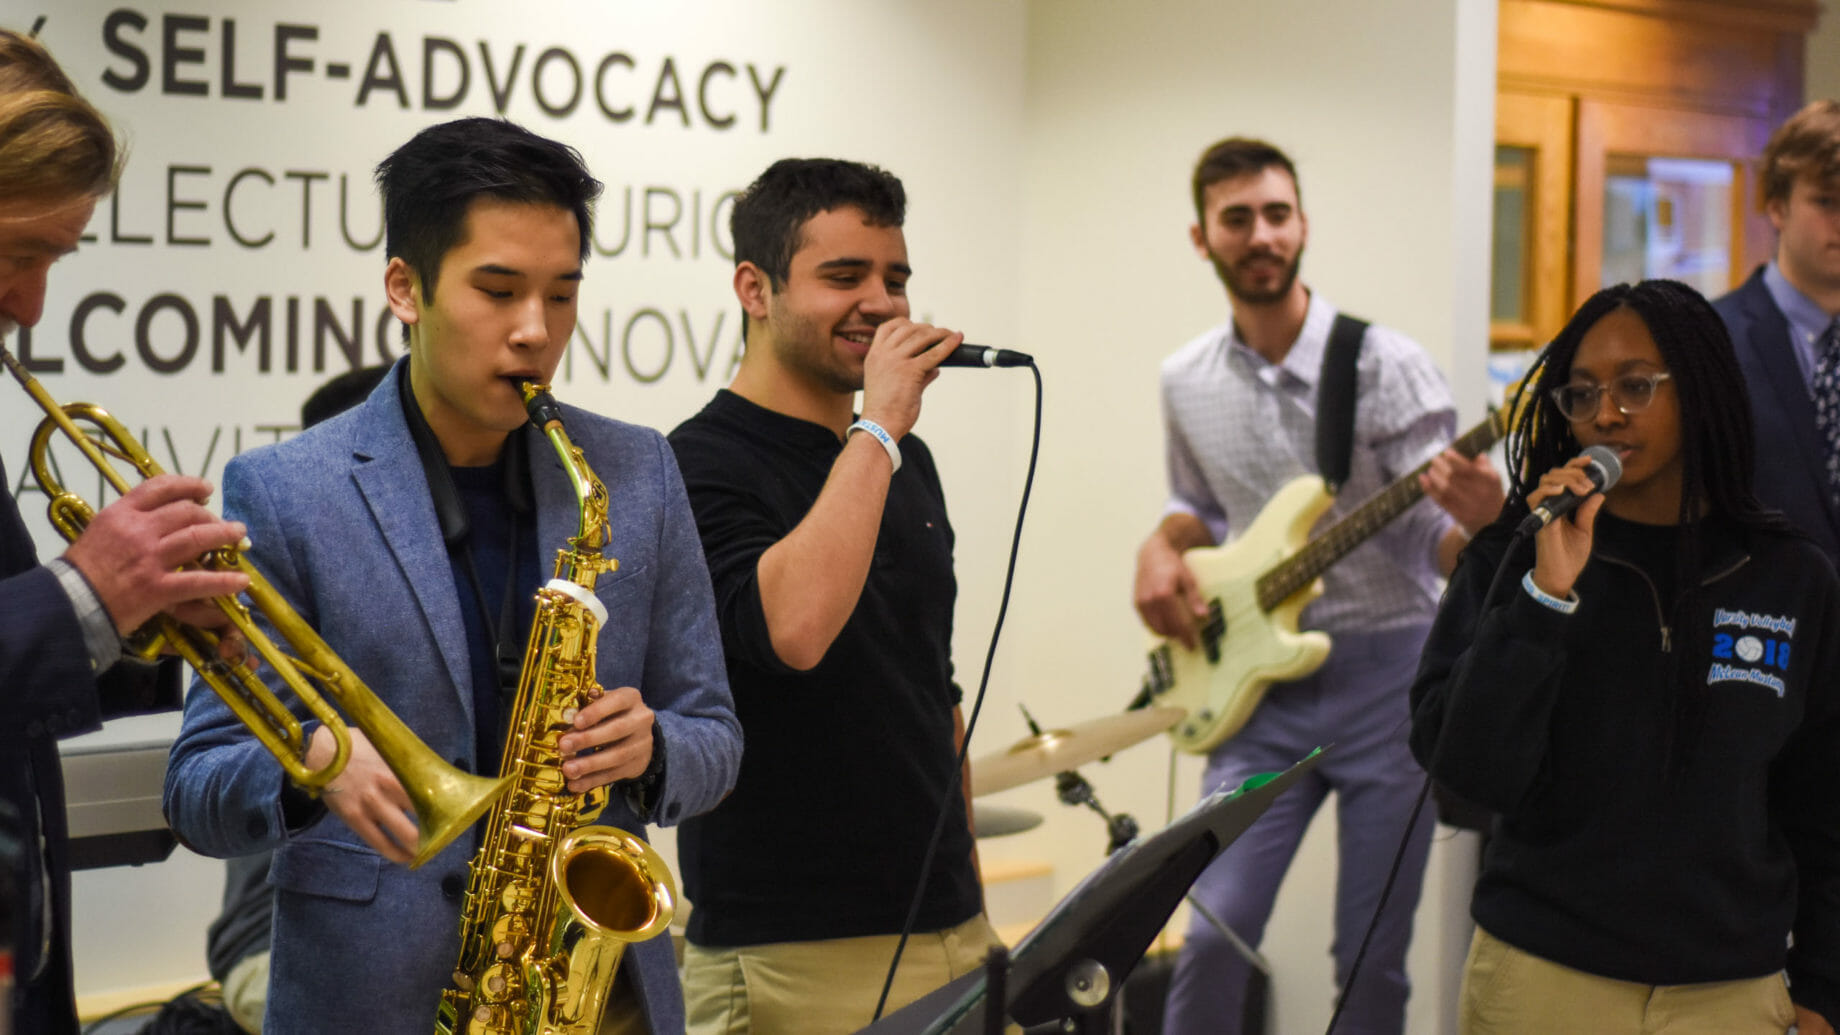 Students Performing Jazz Music